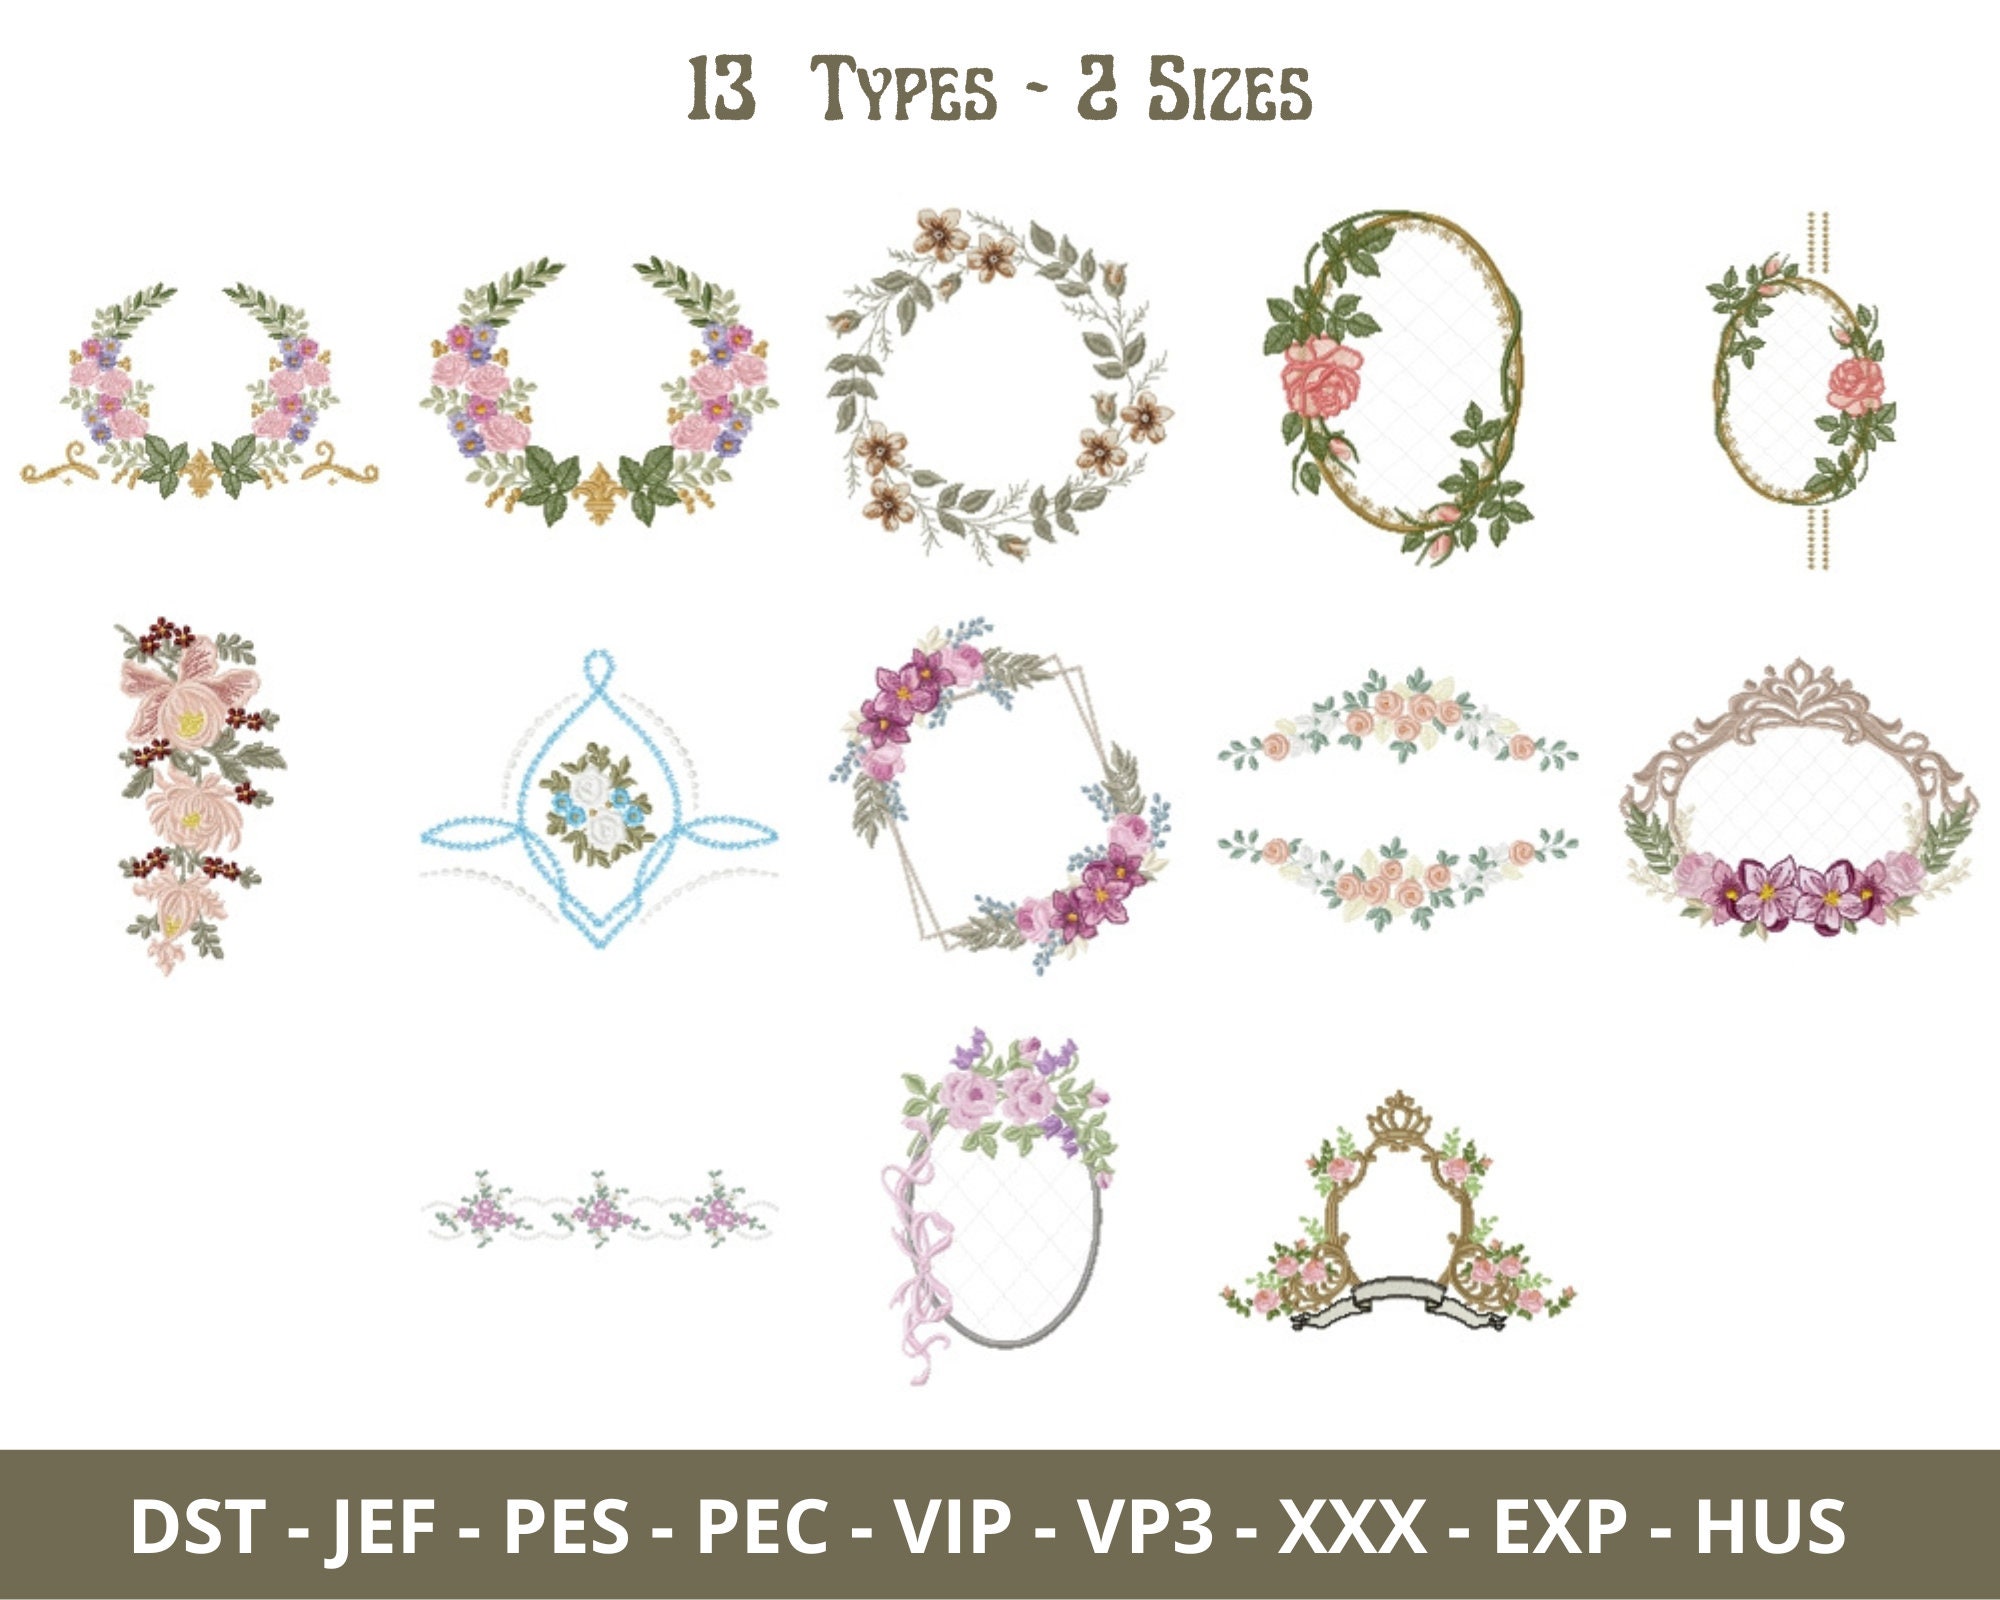 Floral Frame Machine Embroidery Design 13 Types 2 Sizes image